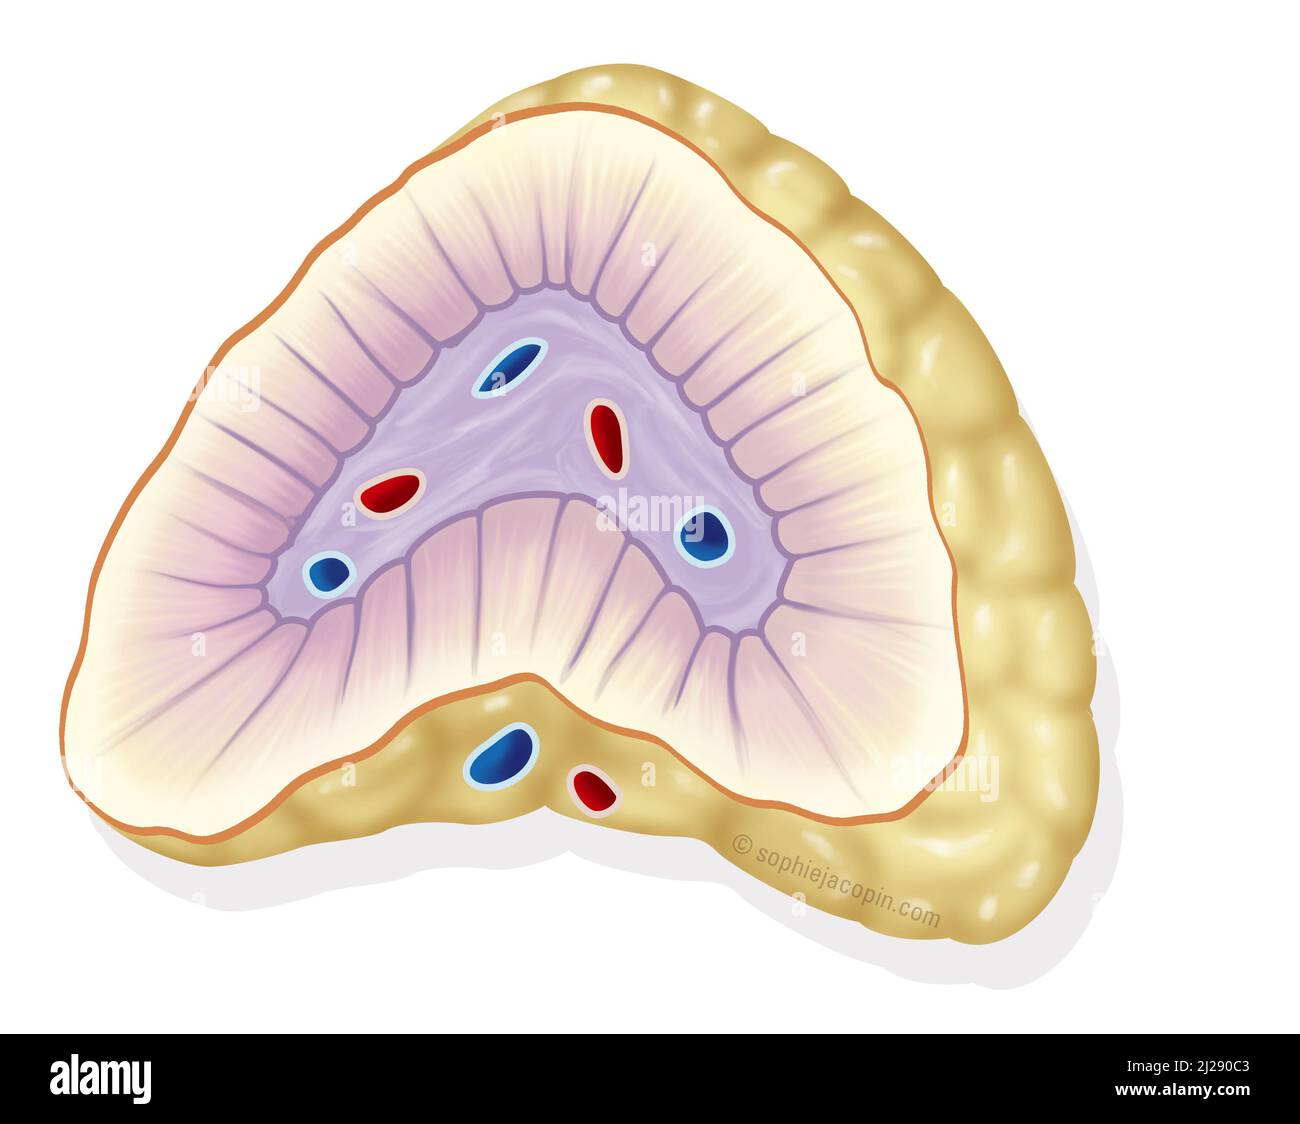 Adrenal gland in cup Stock Photo